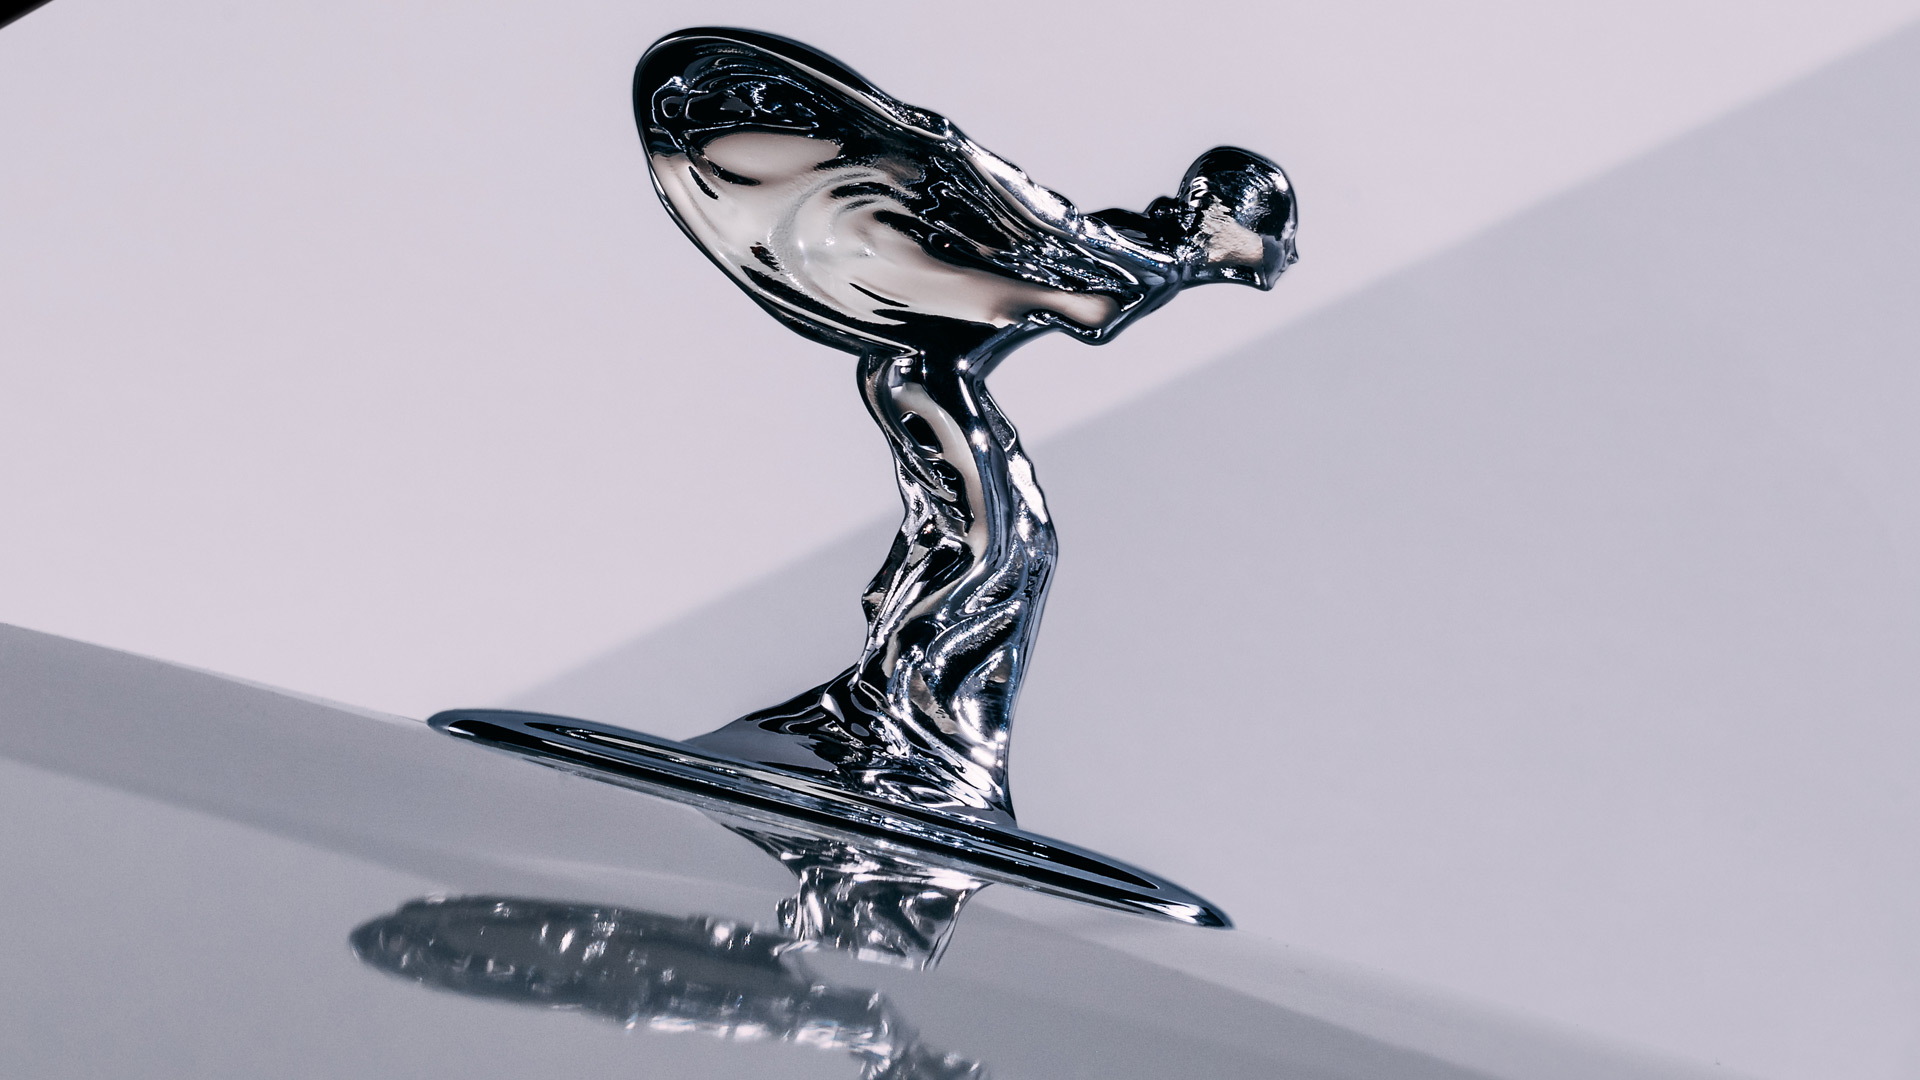 The Hood Ornament Officially Known As The Spirit Of Ecstasy Can Be Found On Which Car